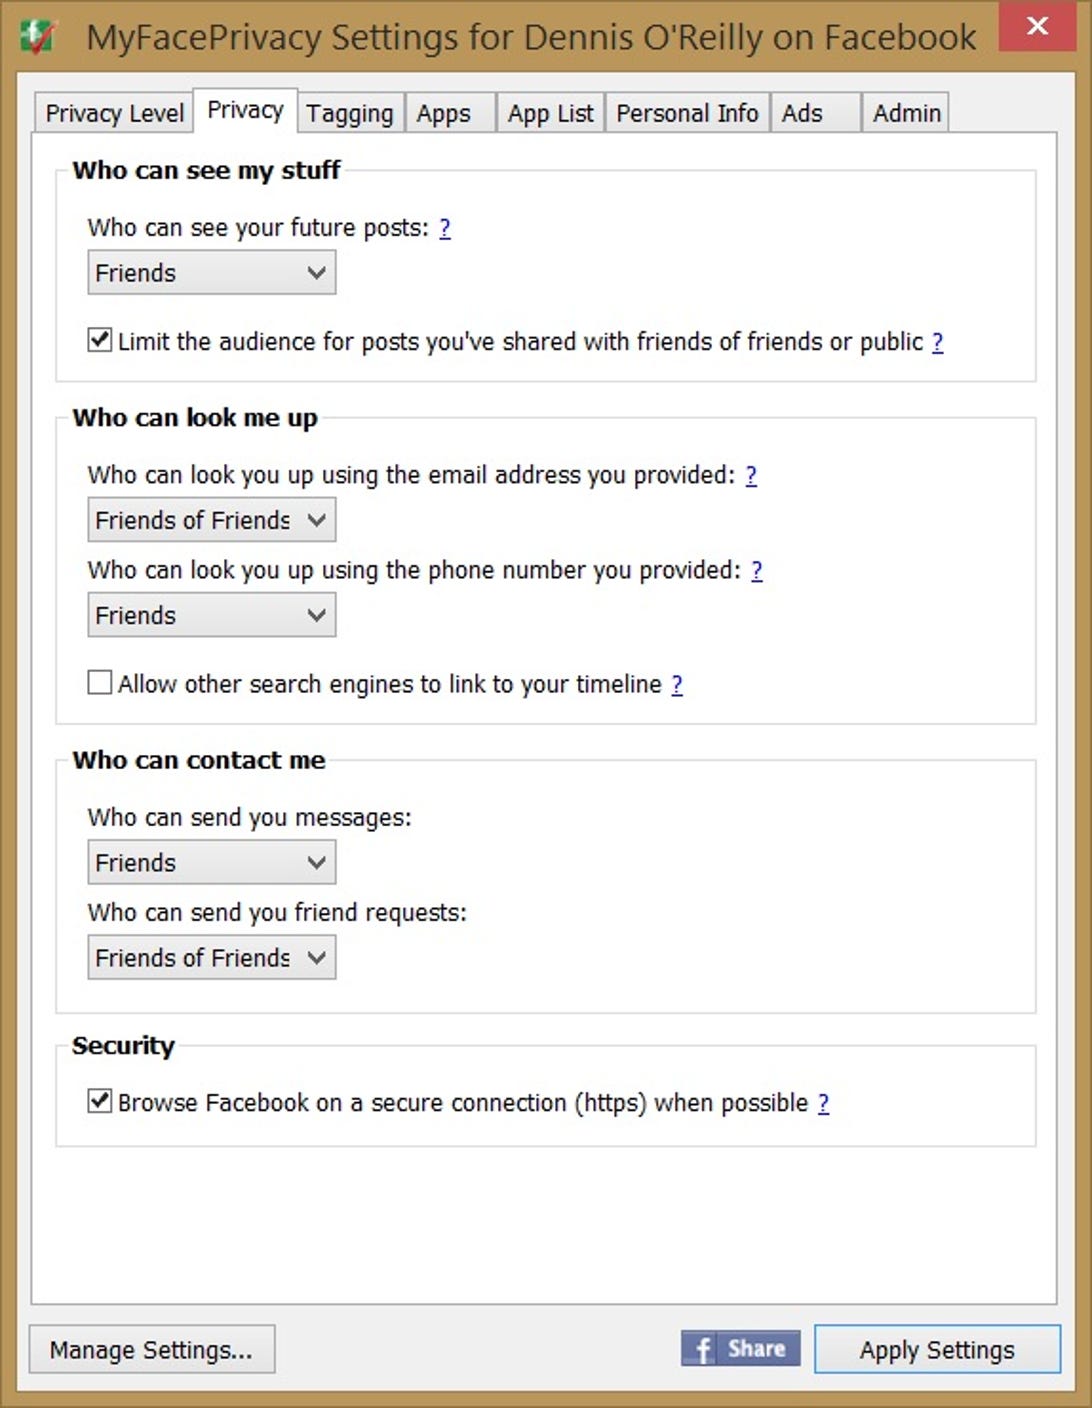 MyFacePrivacy's privacy-settings dialog box